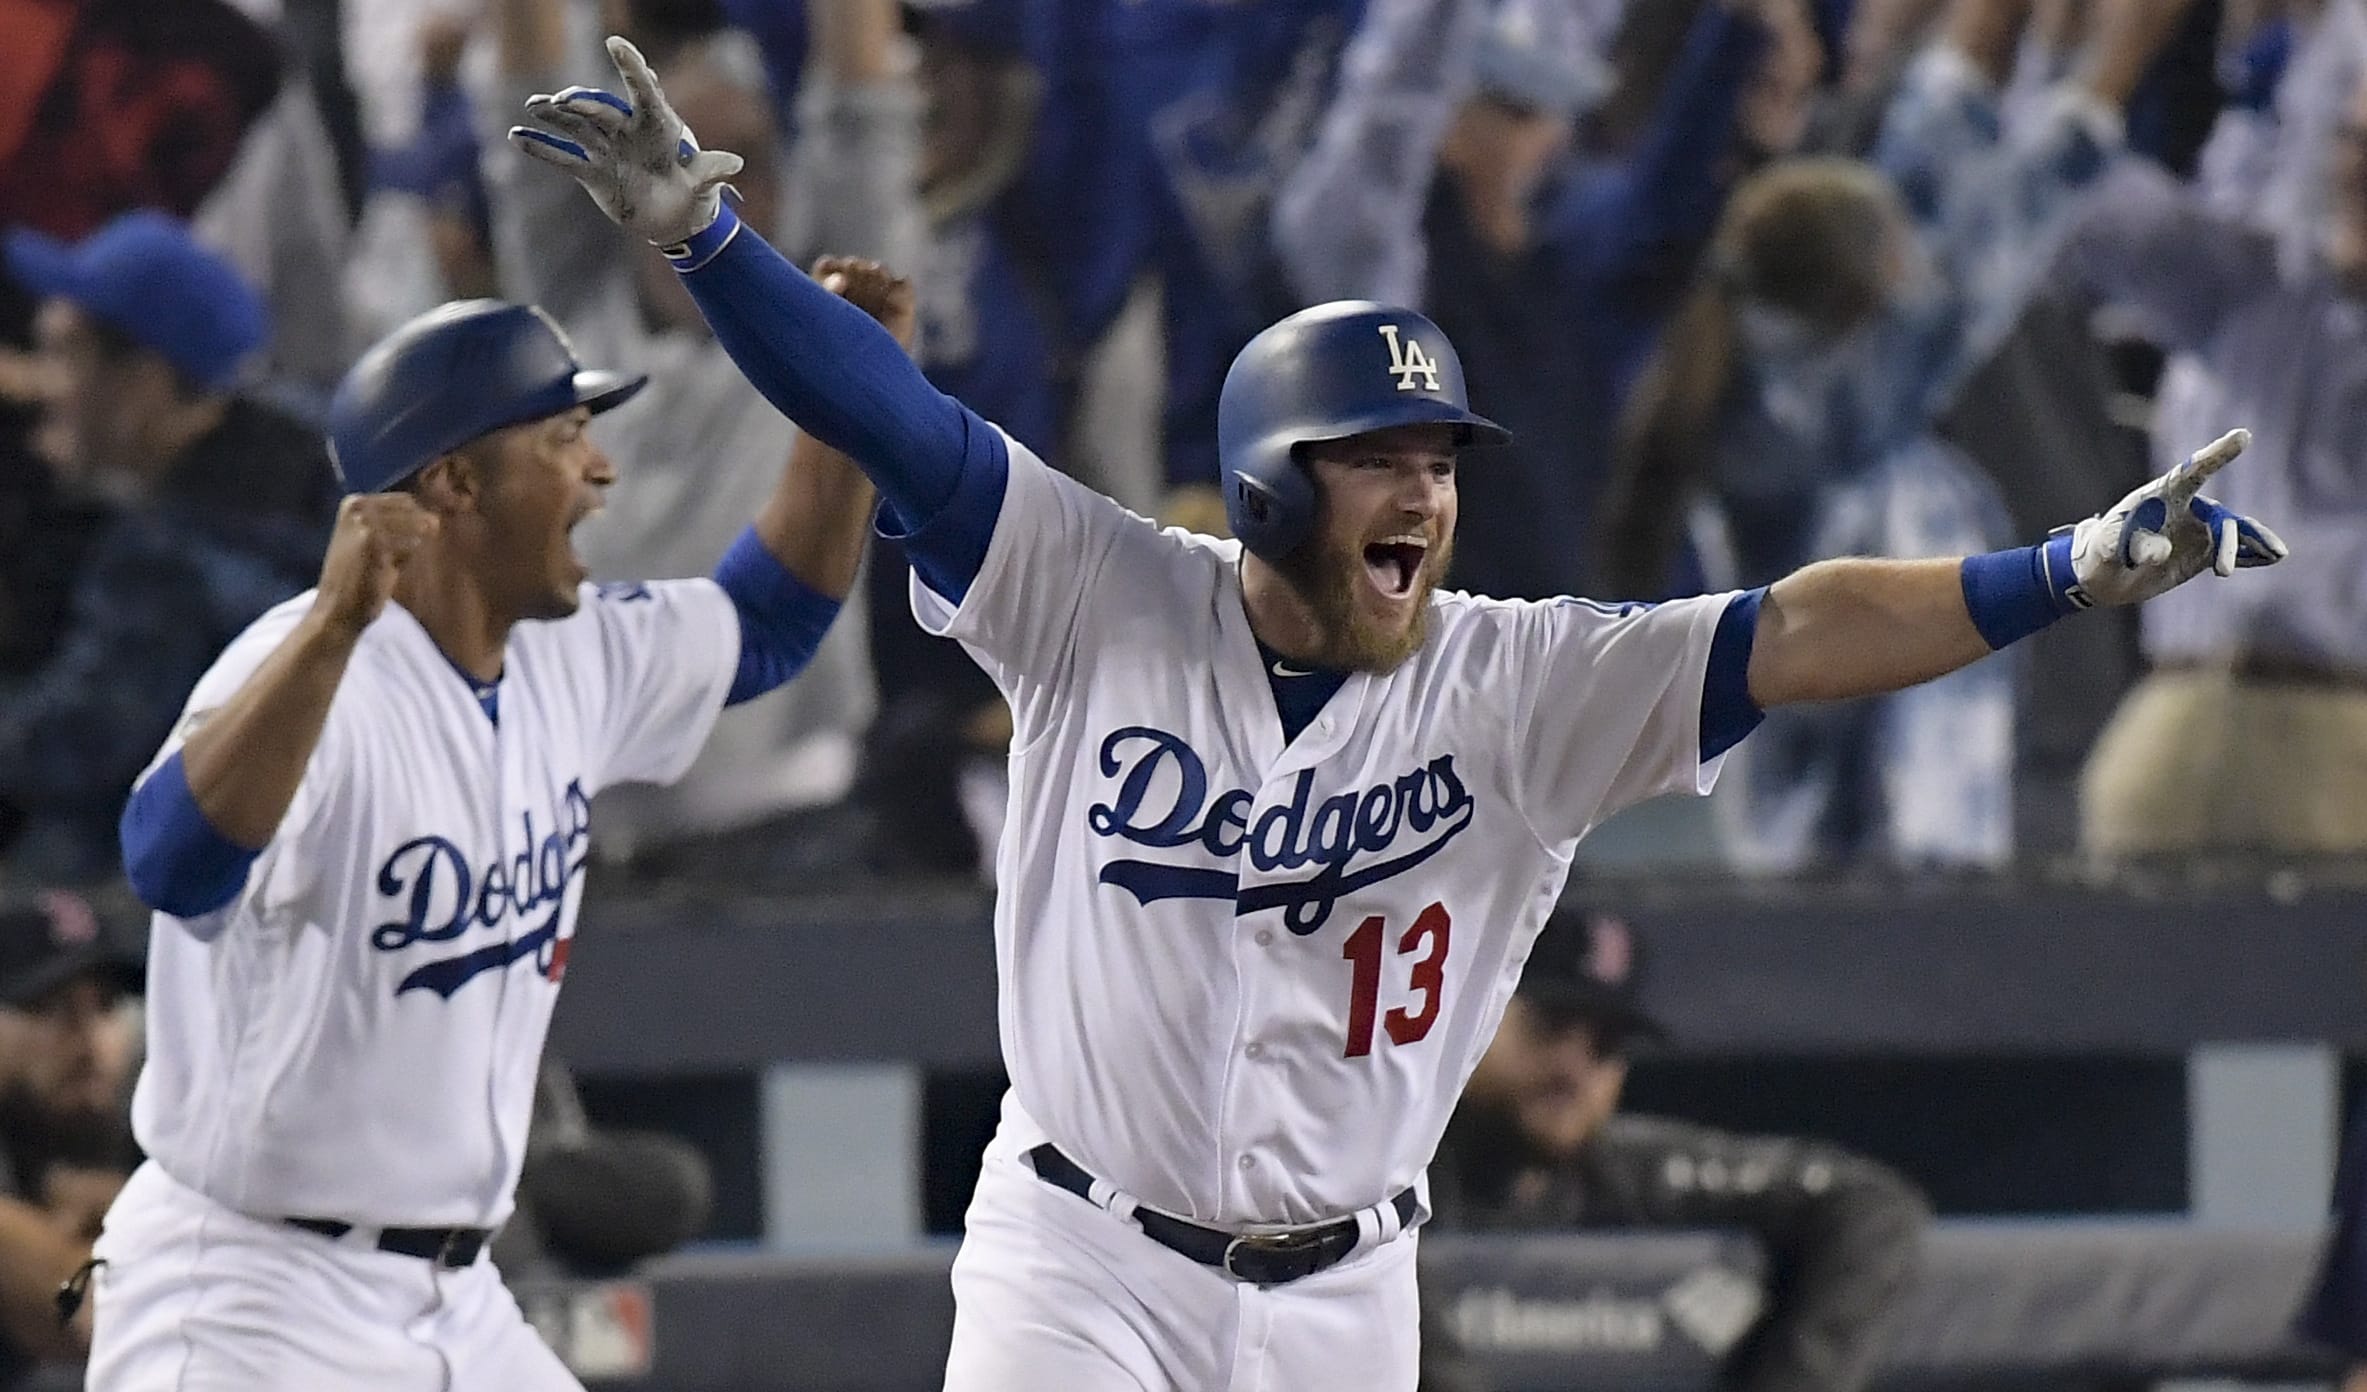 Los Angeles Dodgers' Max Muncy celebrates his walk off home run against the Boston Red Sox during the 18th inning in Game 3 of the World Series baseball game on Saturday, Oct. 27, 2018, in Los Angeles. (AP Photo/Mark J.